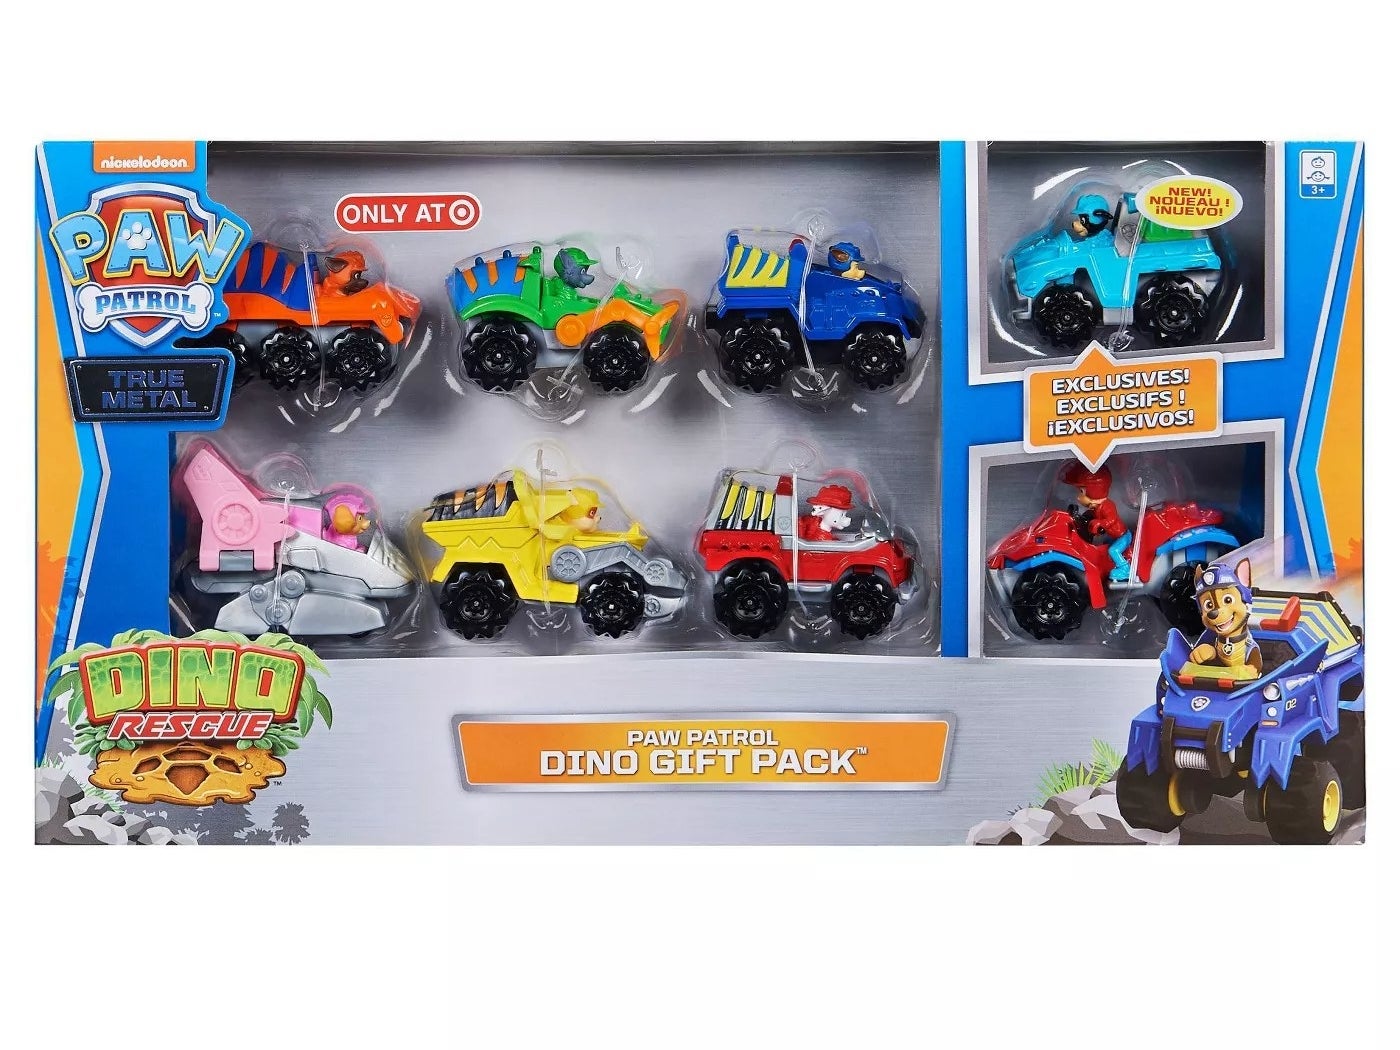 The PAW Patrol Dino Gift Pack